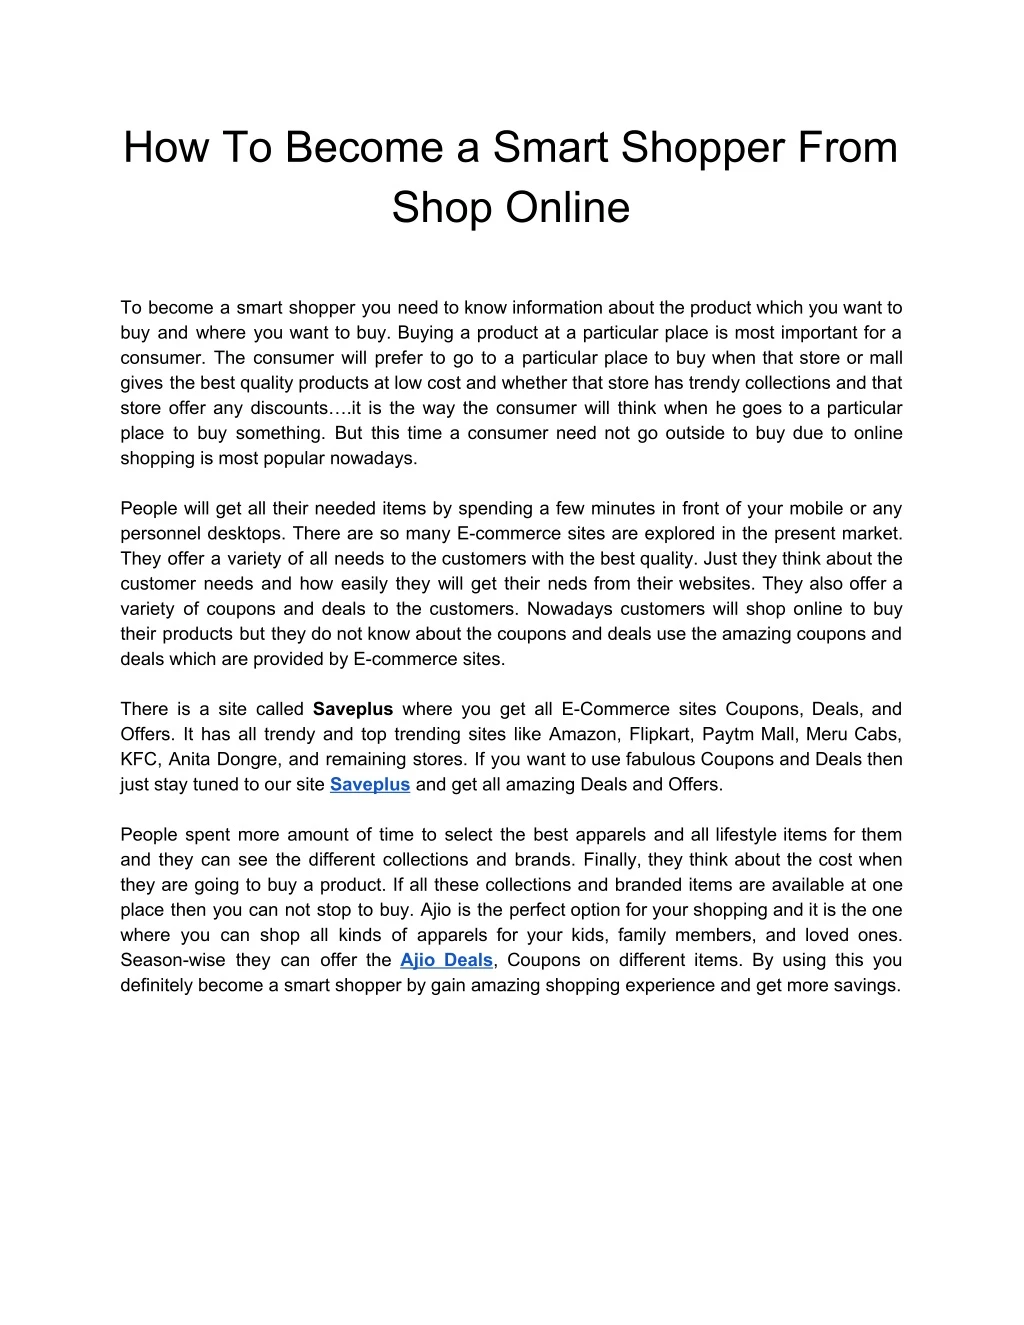 how to become a smart shopper from shop online